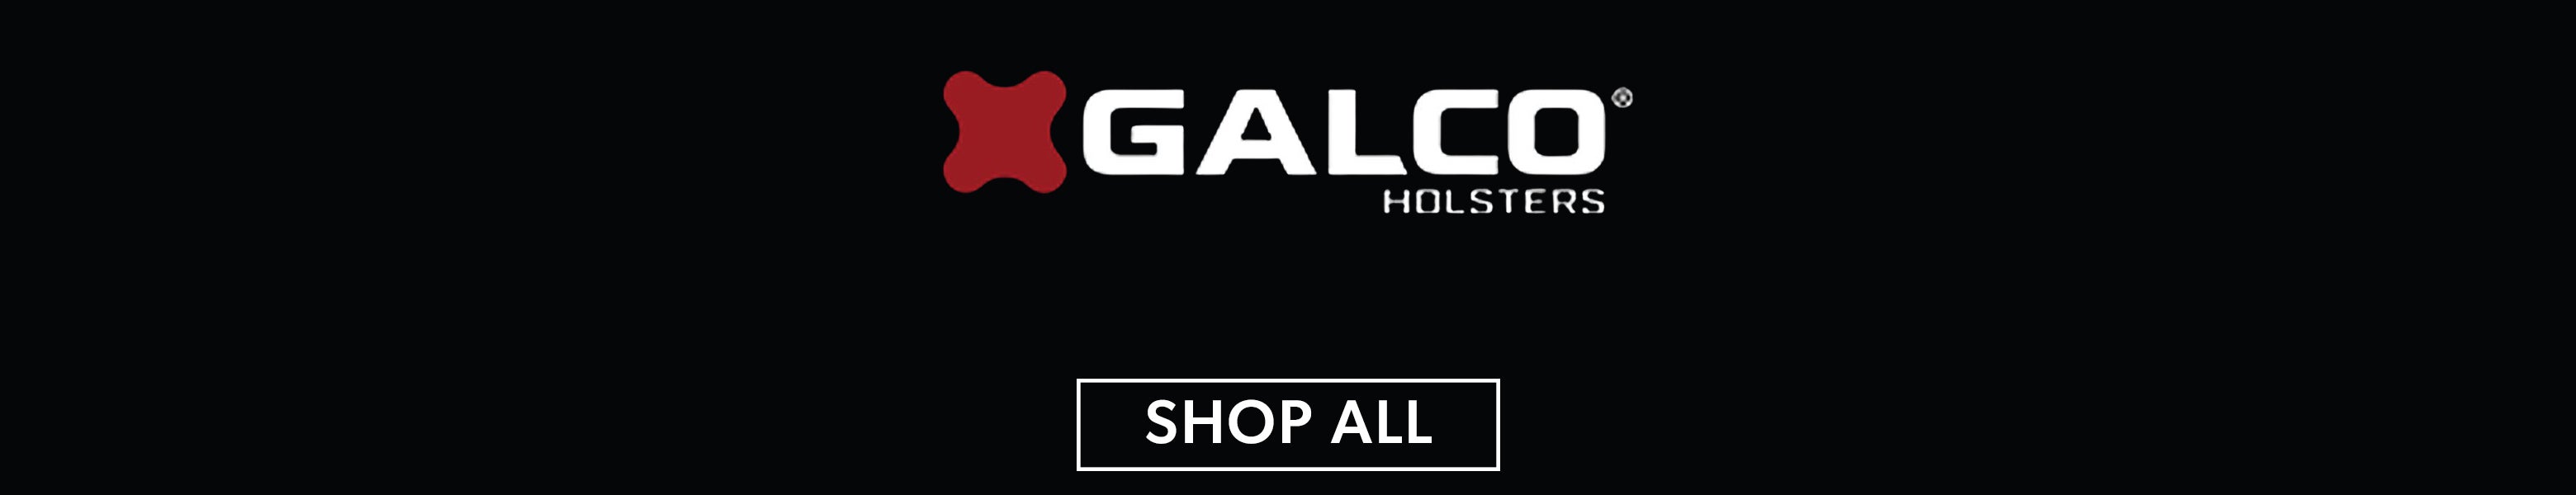 Galco Shop All Footer